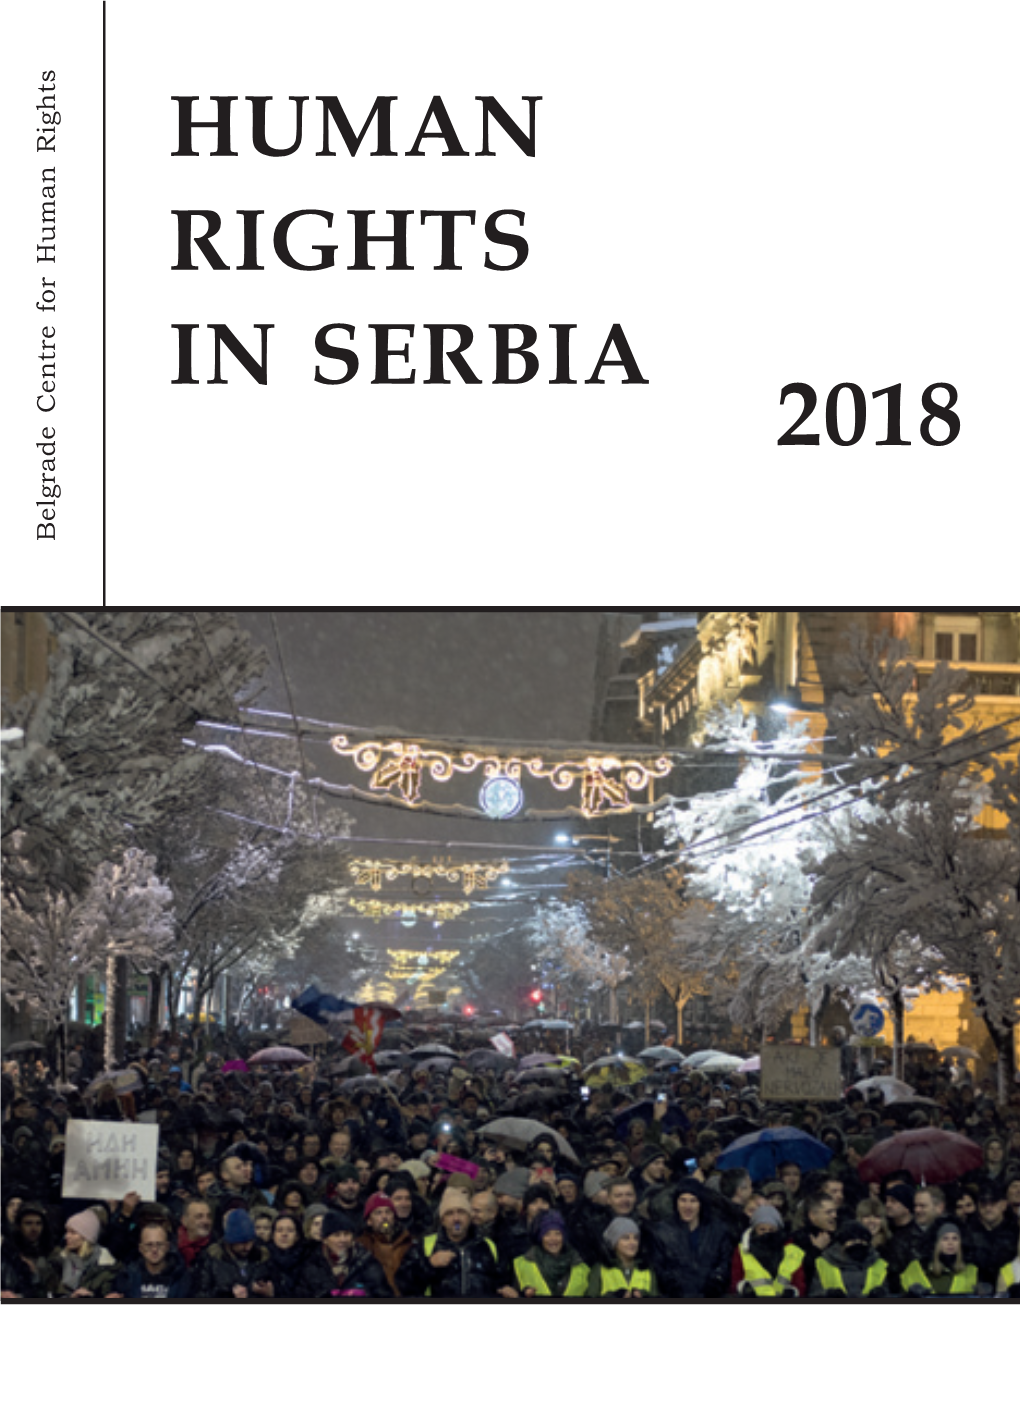 Human Rights in Serbia 2018 Law, Practice and International Human Rights Standards